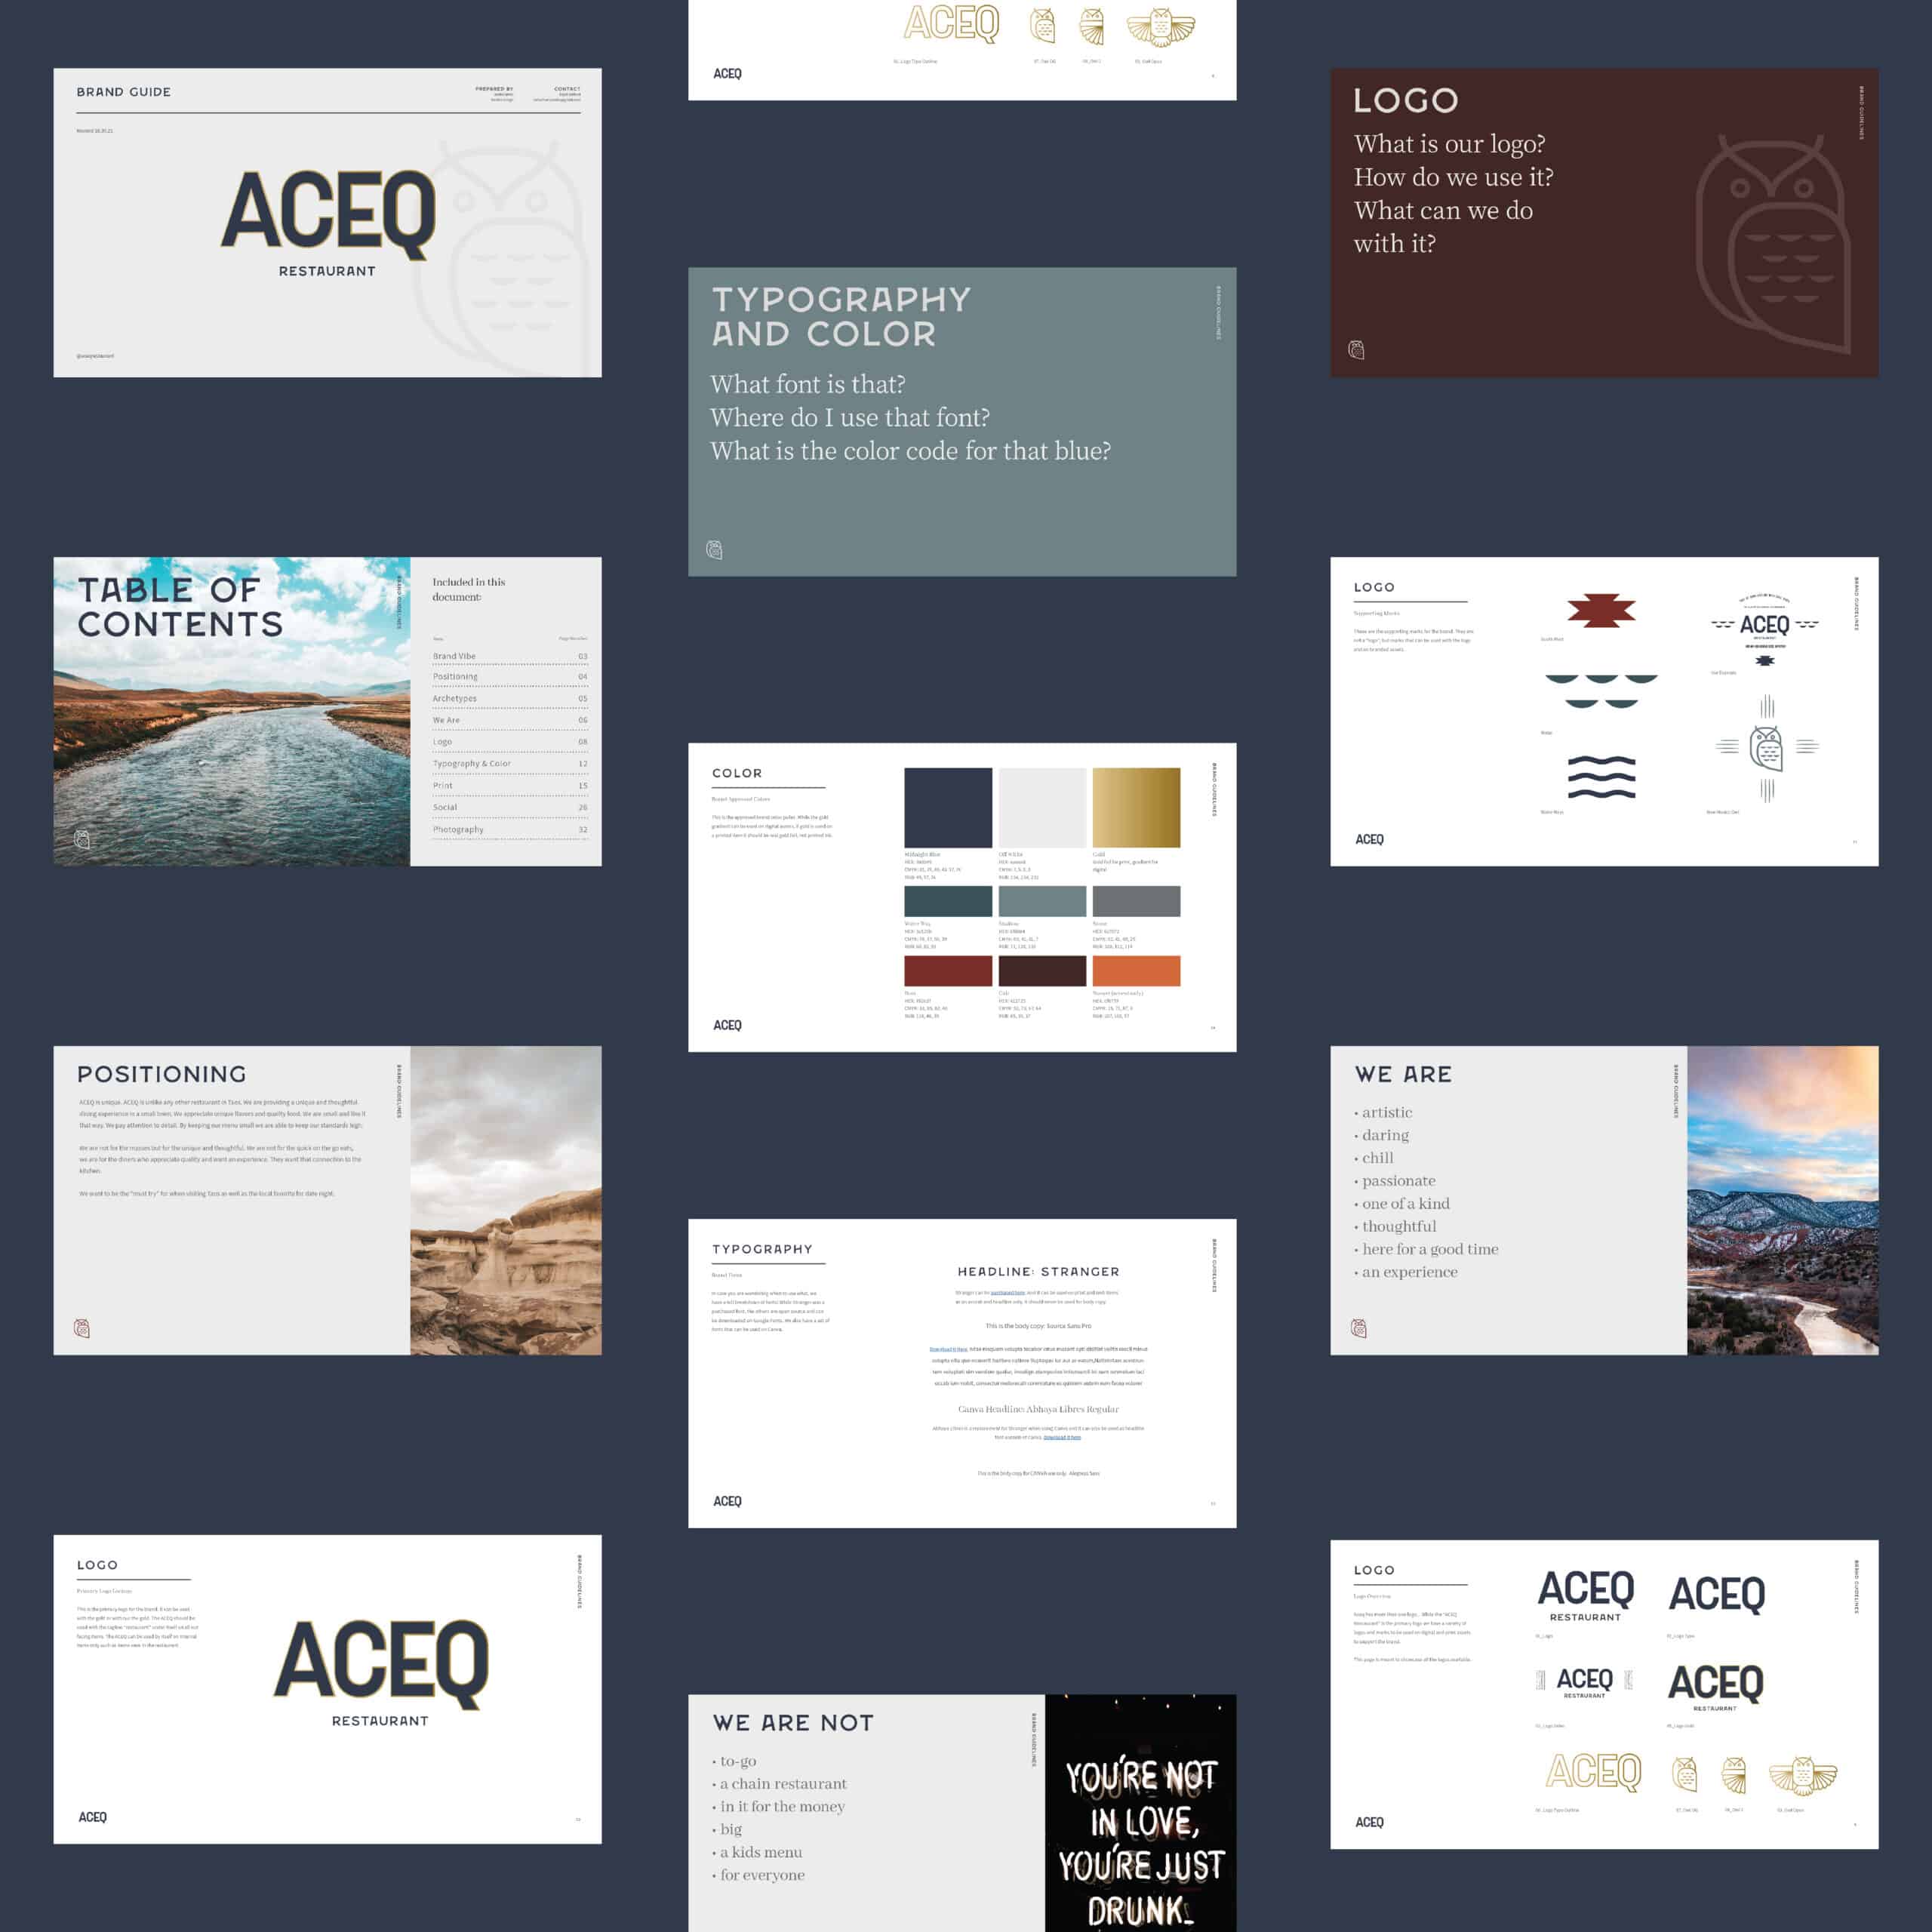 Brand Guide for ACEQ Restaurant in Taos New Mexico of cool and thoughtful branding by Stellen Design Branding Agency in Los Angeles CA